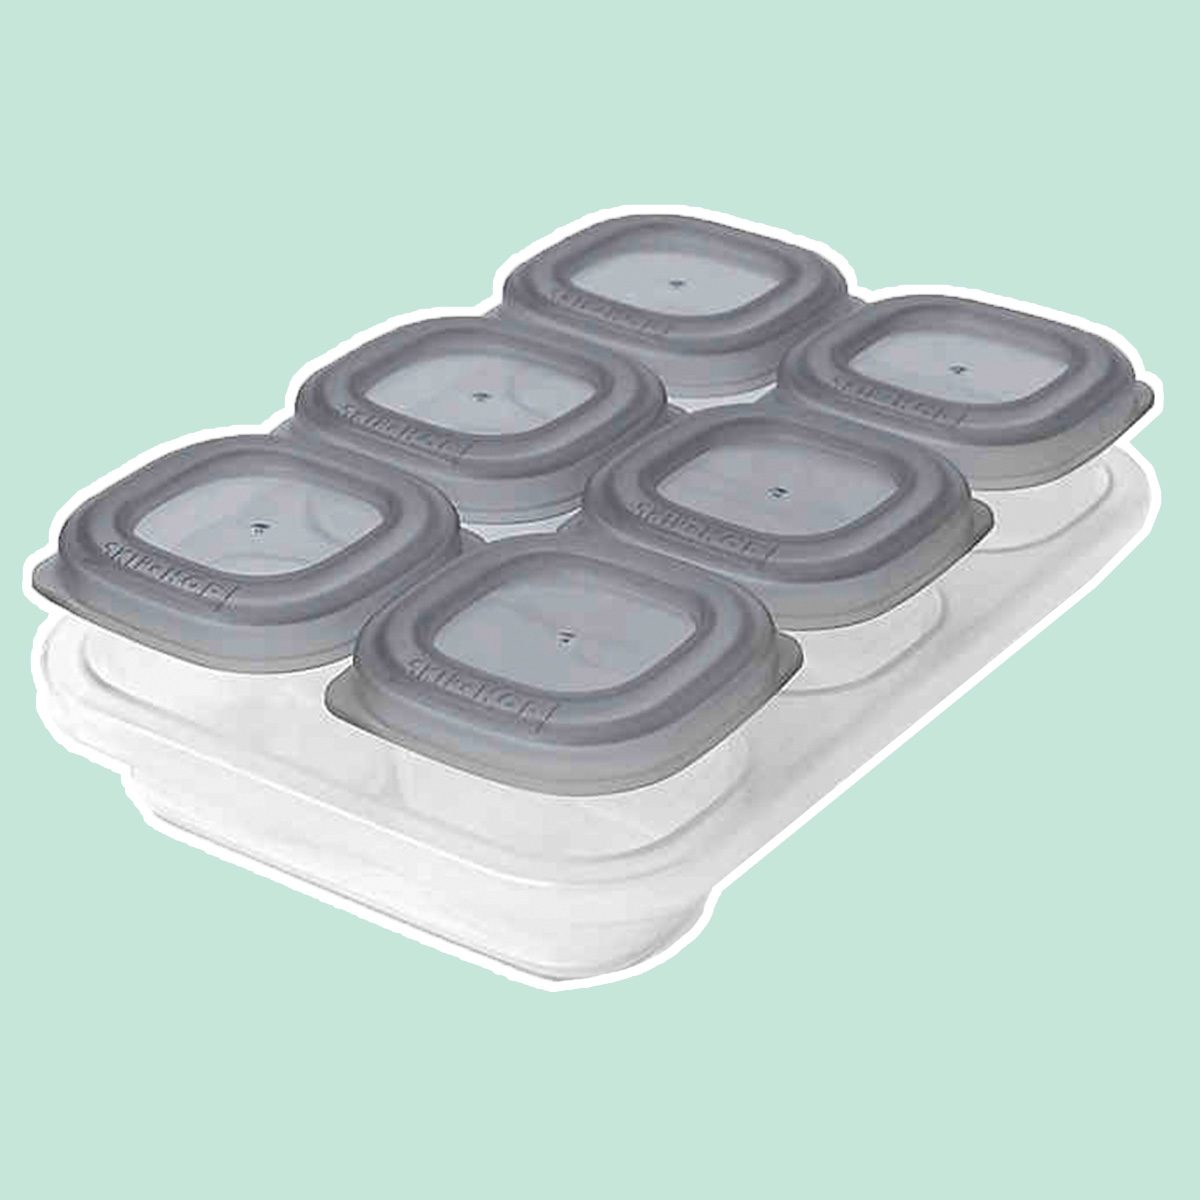 SKIP*HOP® Easy-Store 10-Piece Container and Sliding